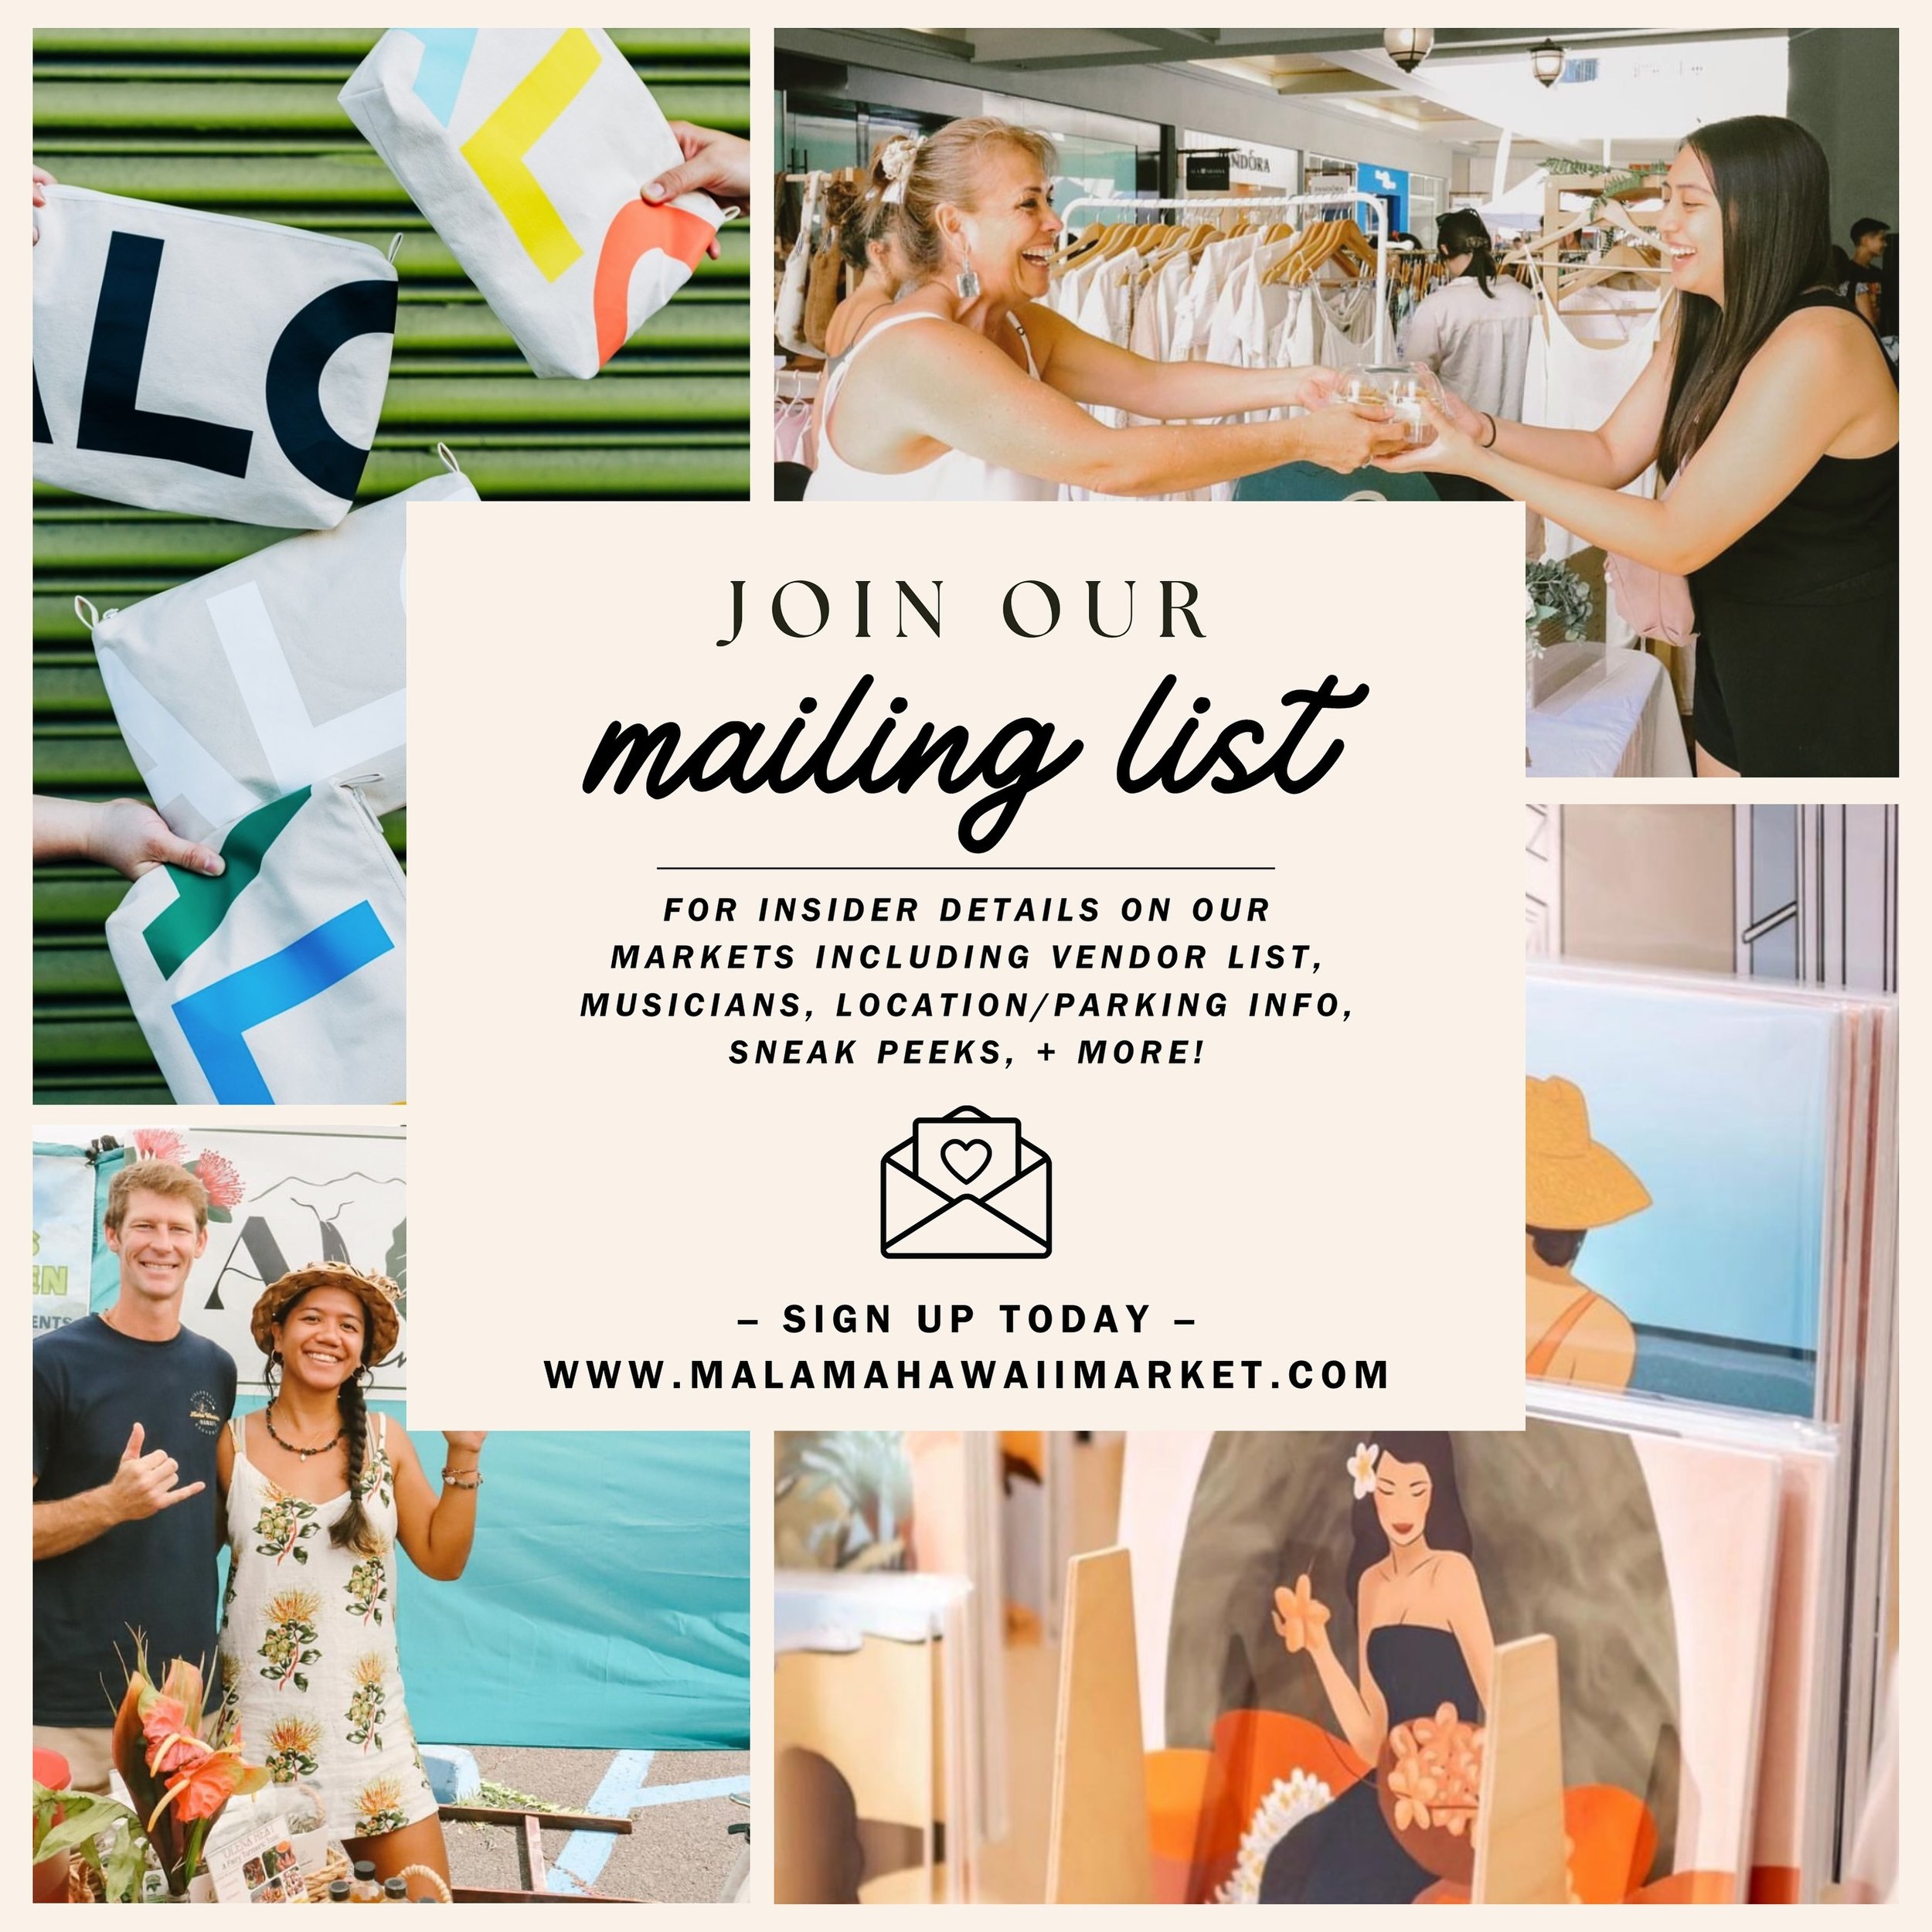 Are you subscribed to our email newsletter? 💌

ICYMI 〰️ We send out a once per week newsletter a few days before each of our markets with ALLLLL of the market deets including a list of participating vendors, location/parking info, which musicians wi